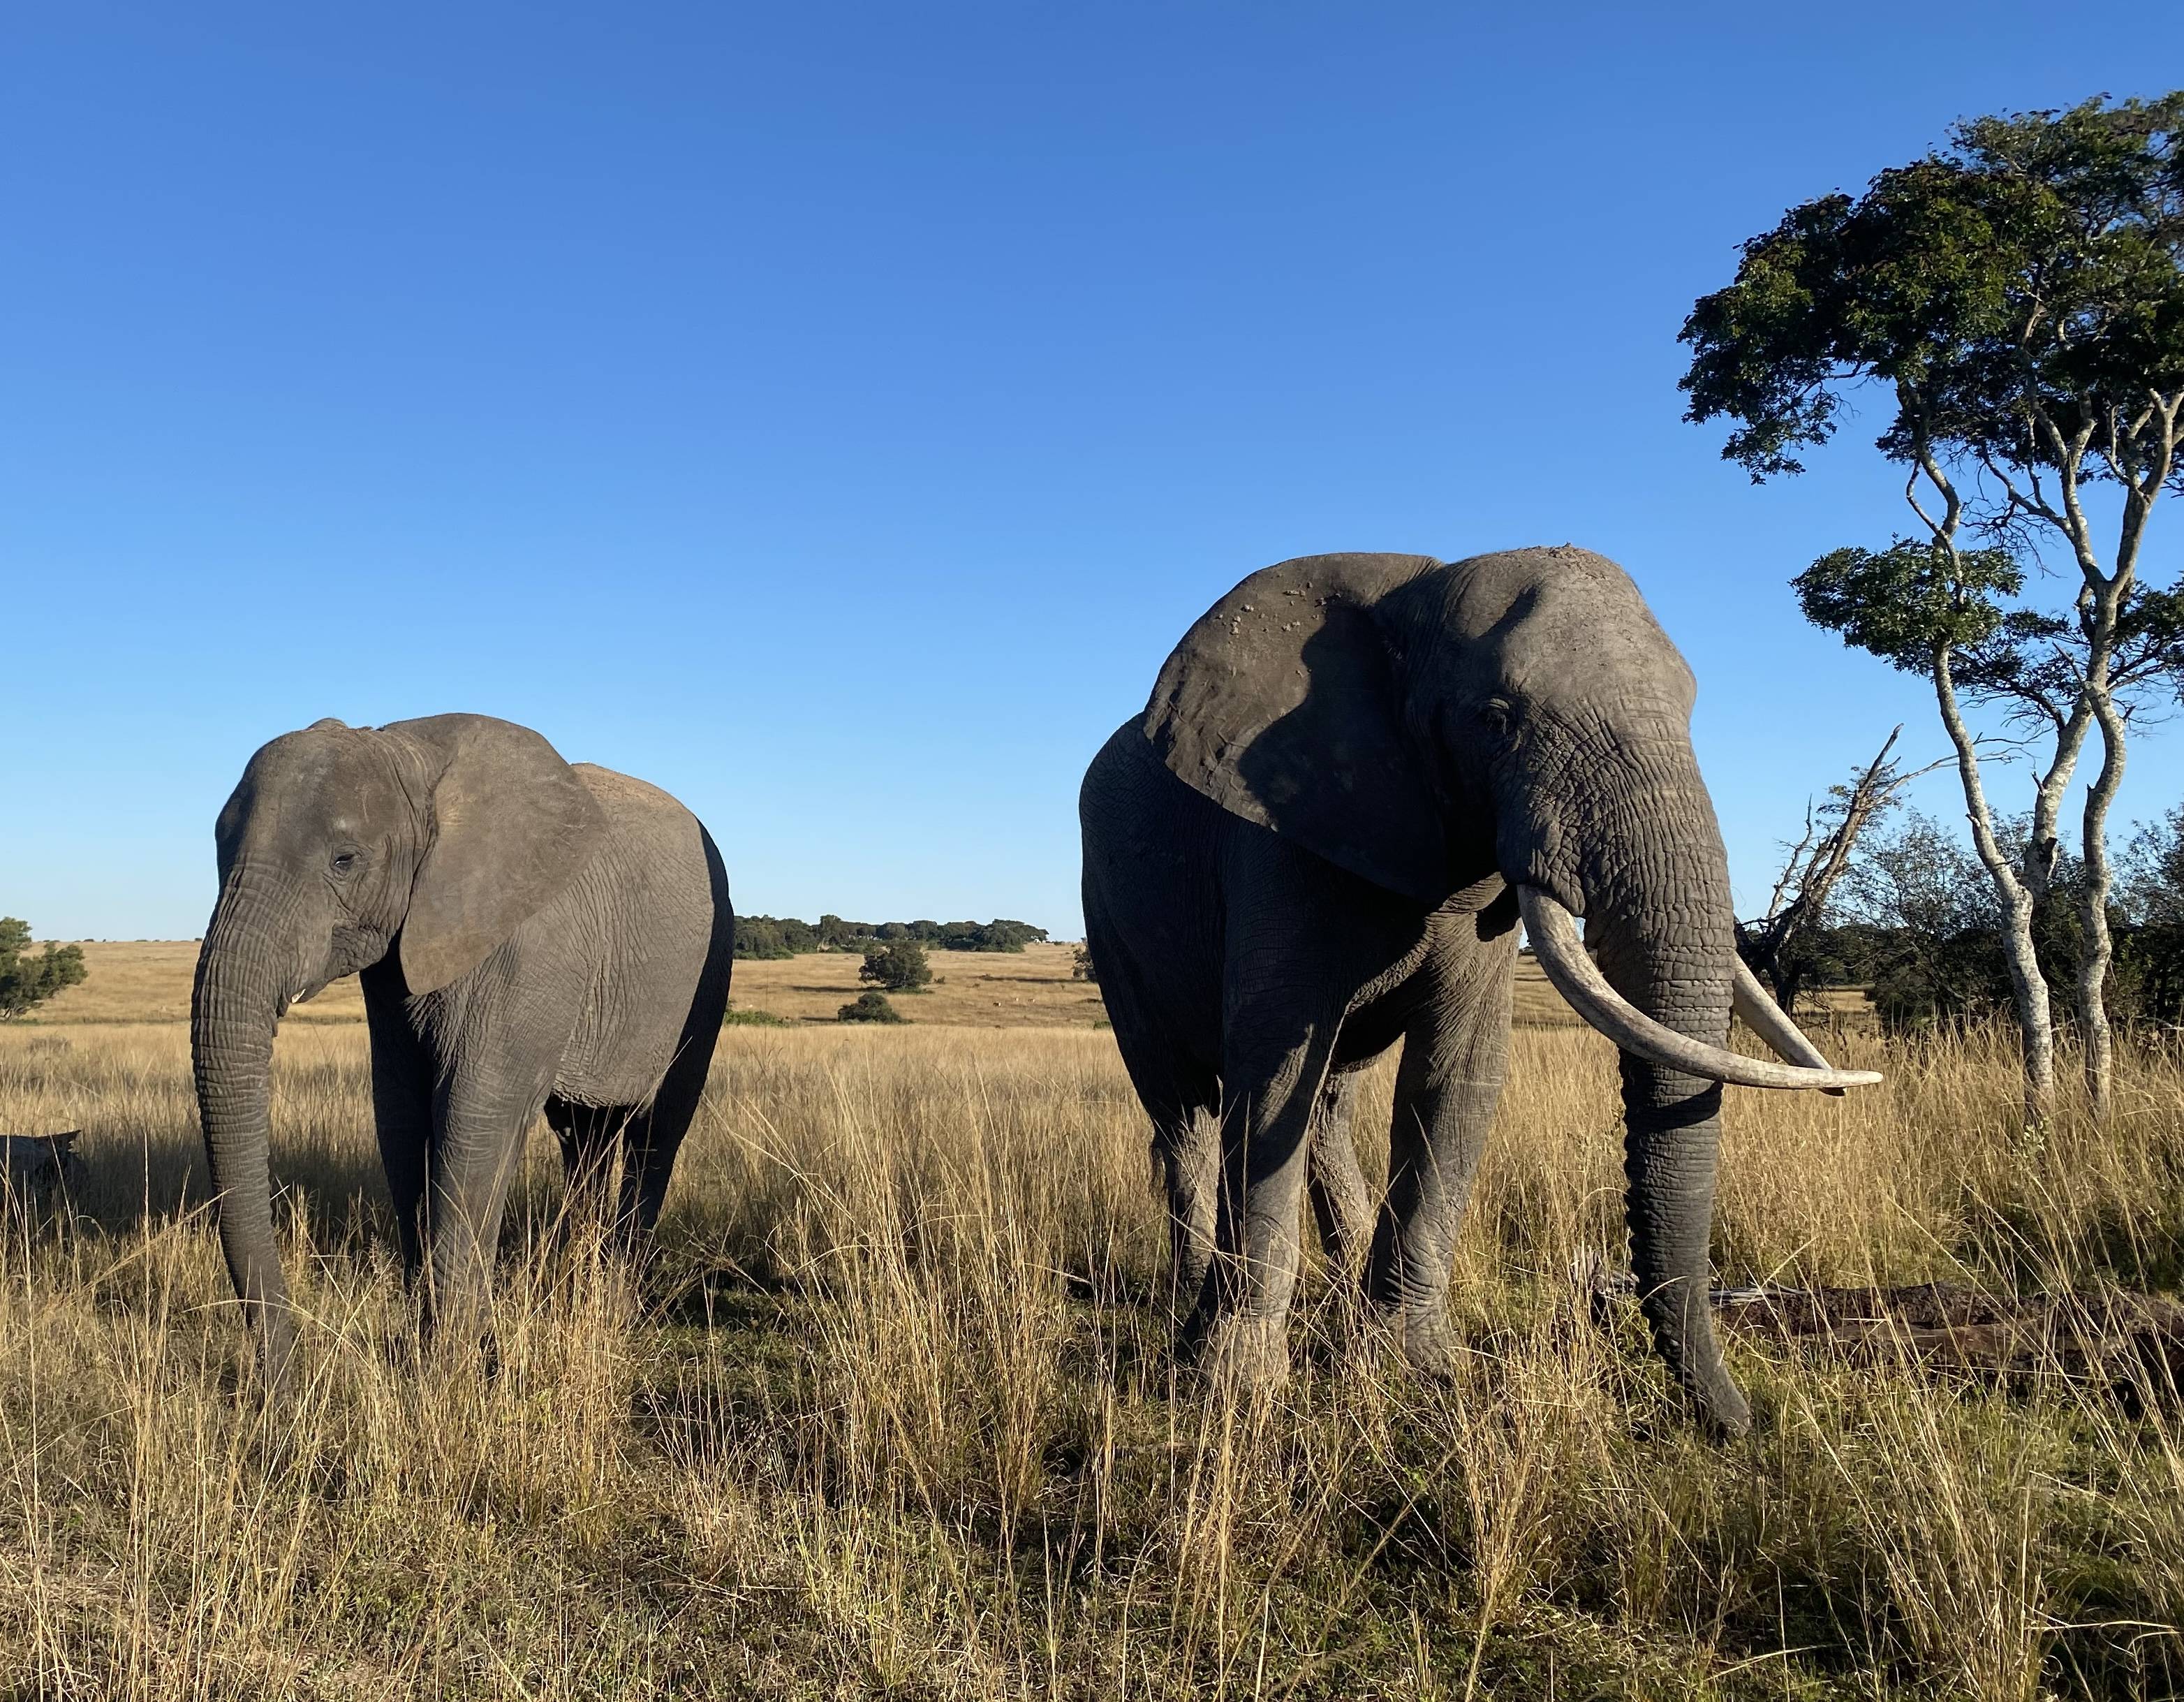 Elephants on the plains of the Imire Conservancy